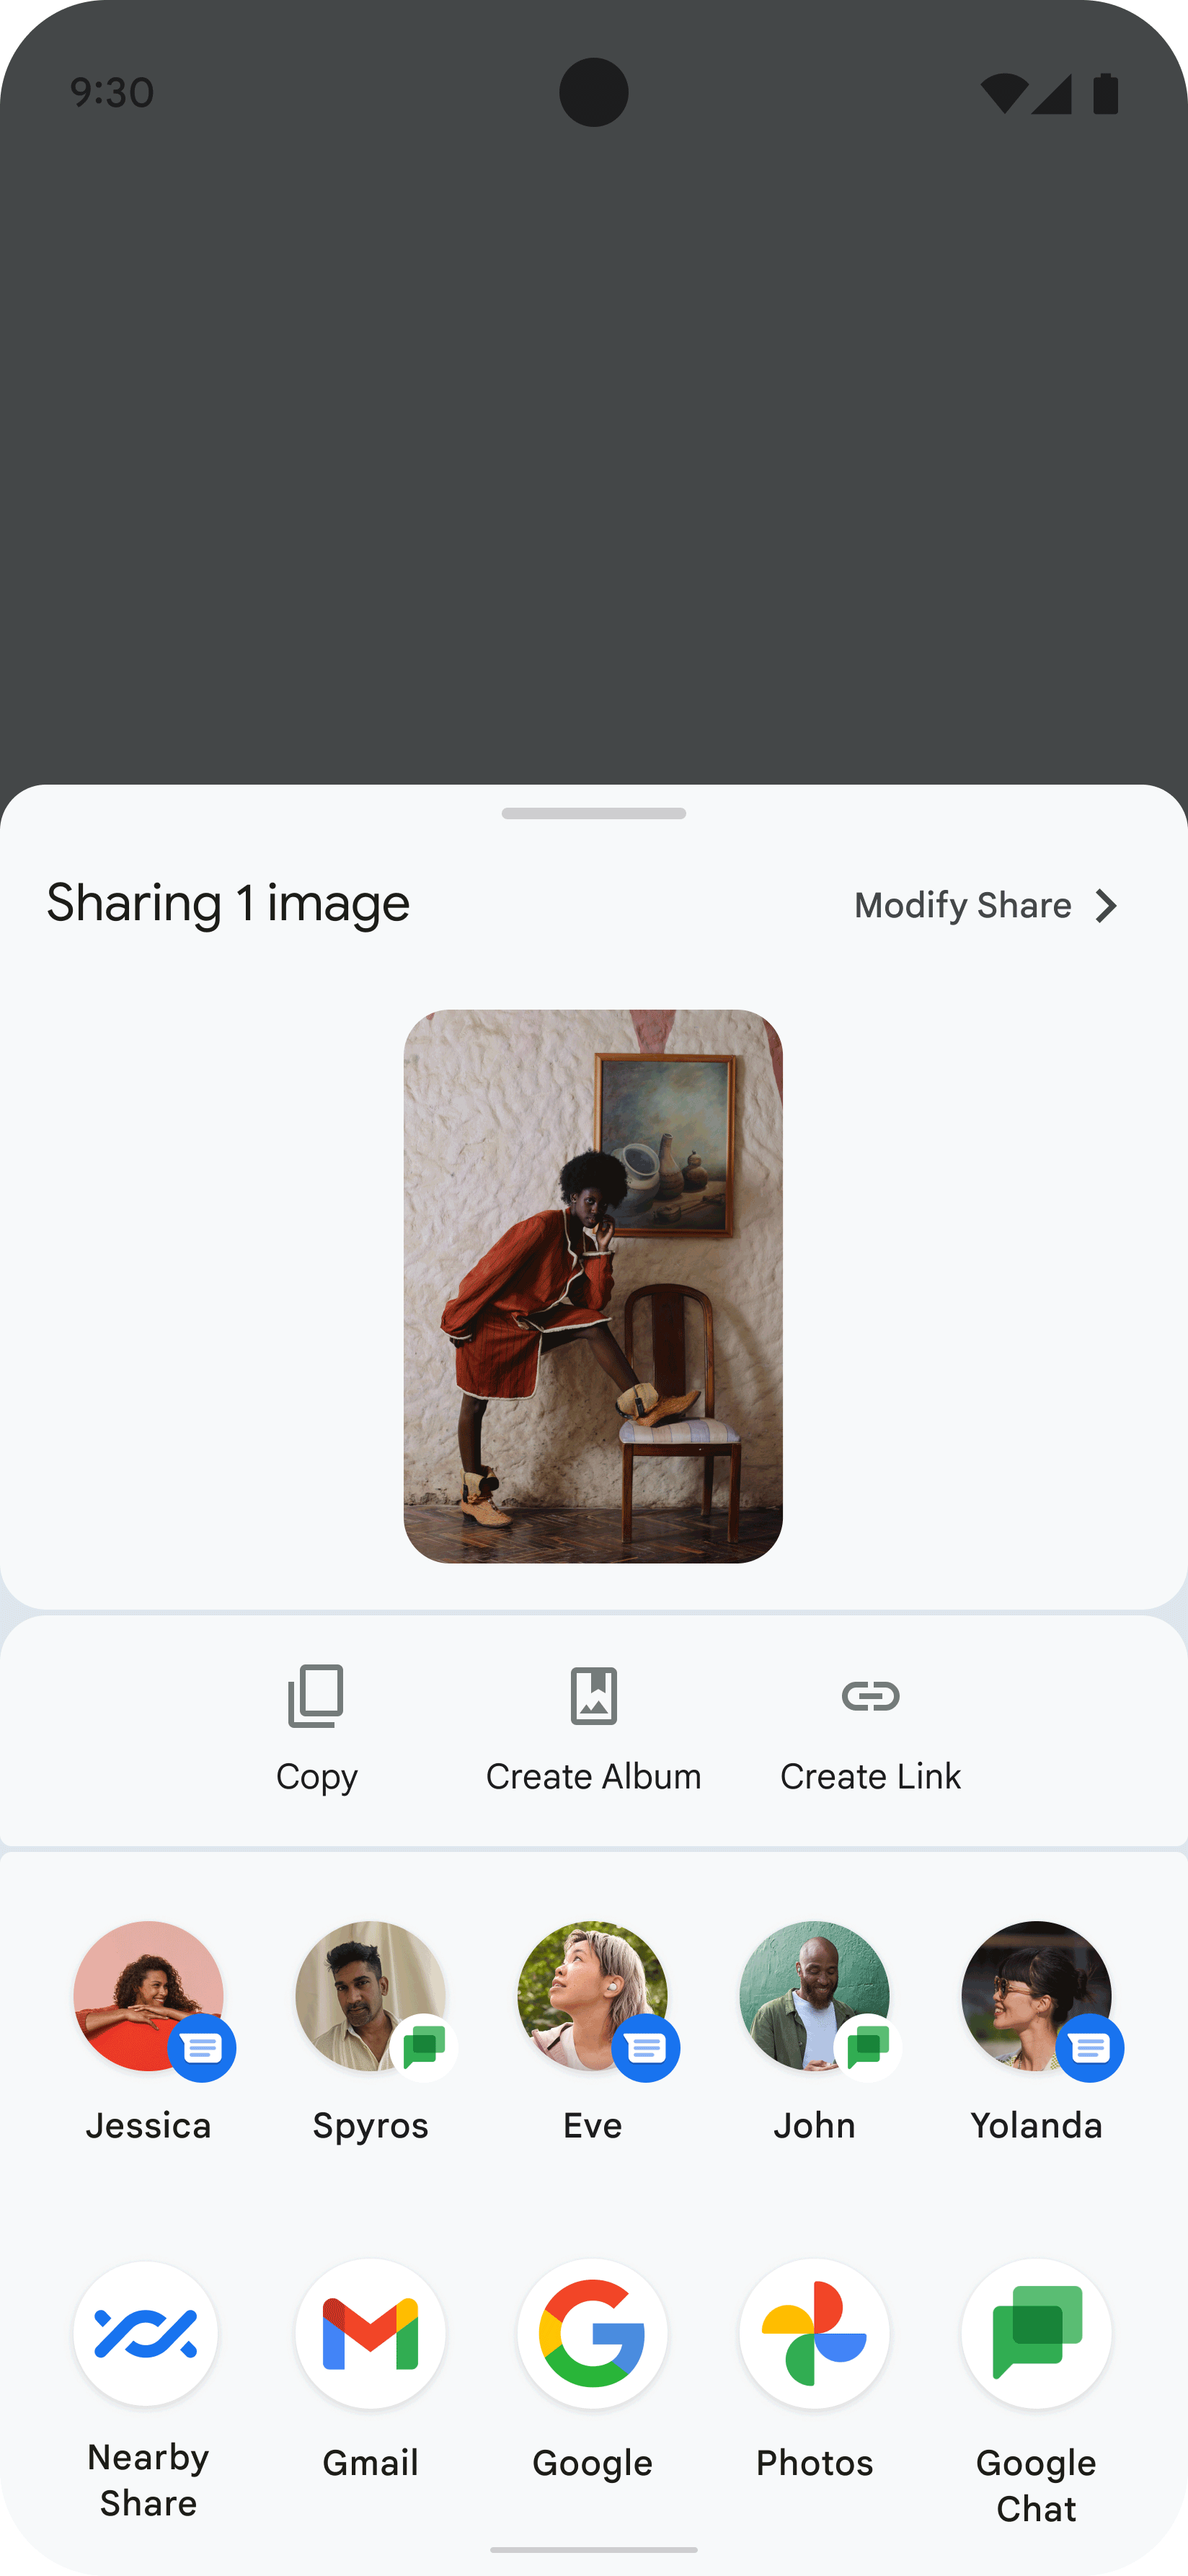 This image shows the sharesheet displayed on an app, the result of the user
  sharing an image of a person. The sharesheet displays multiple icons
  representing possible contacts and apps to share the image with.